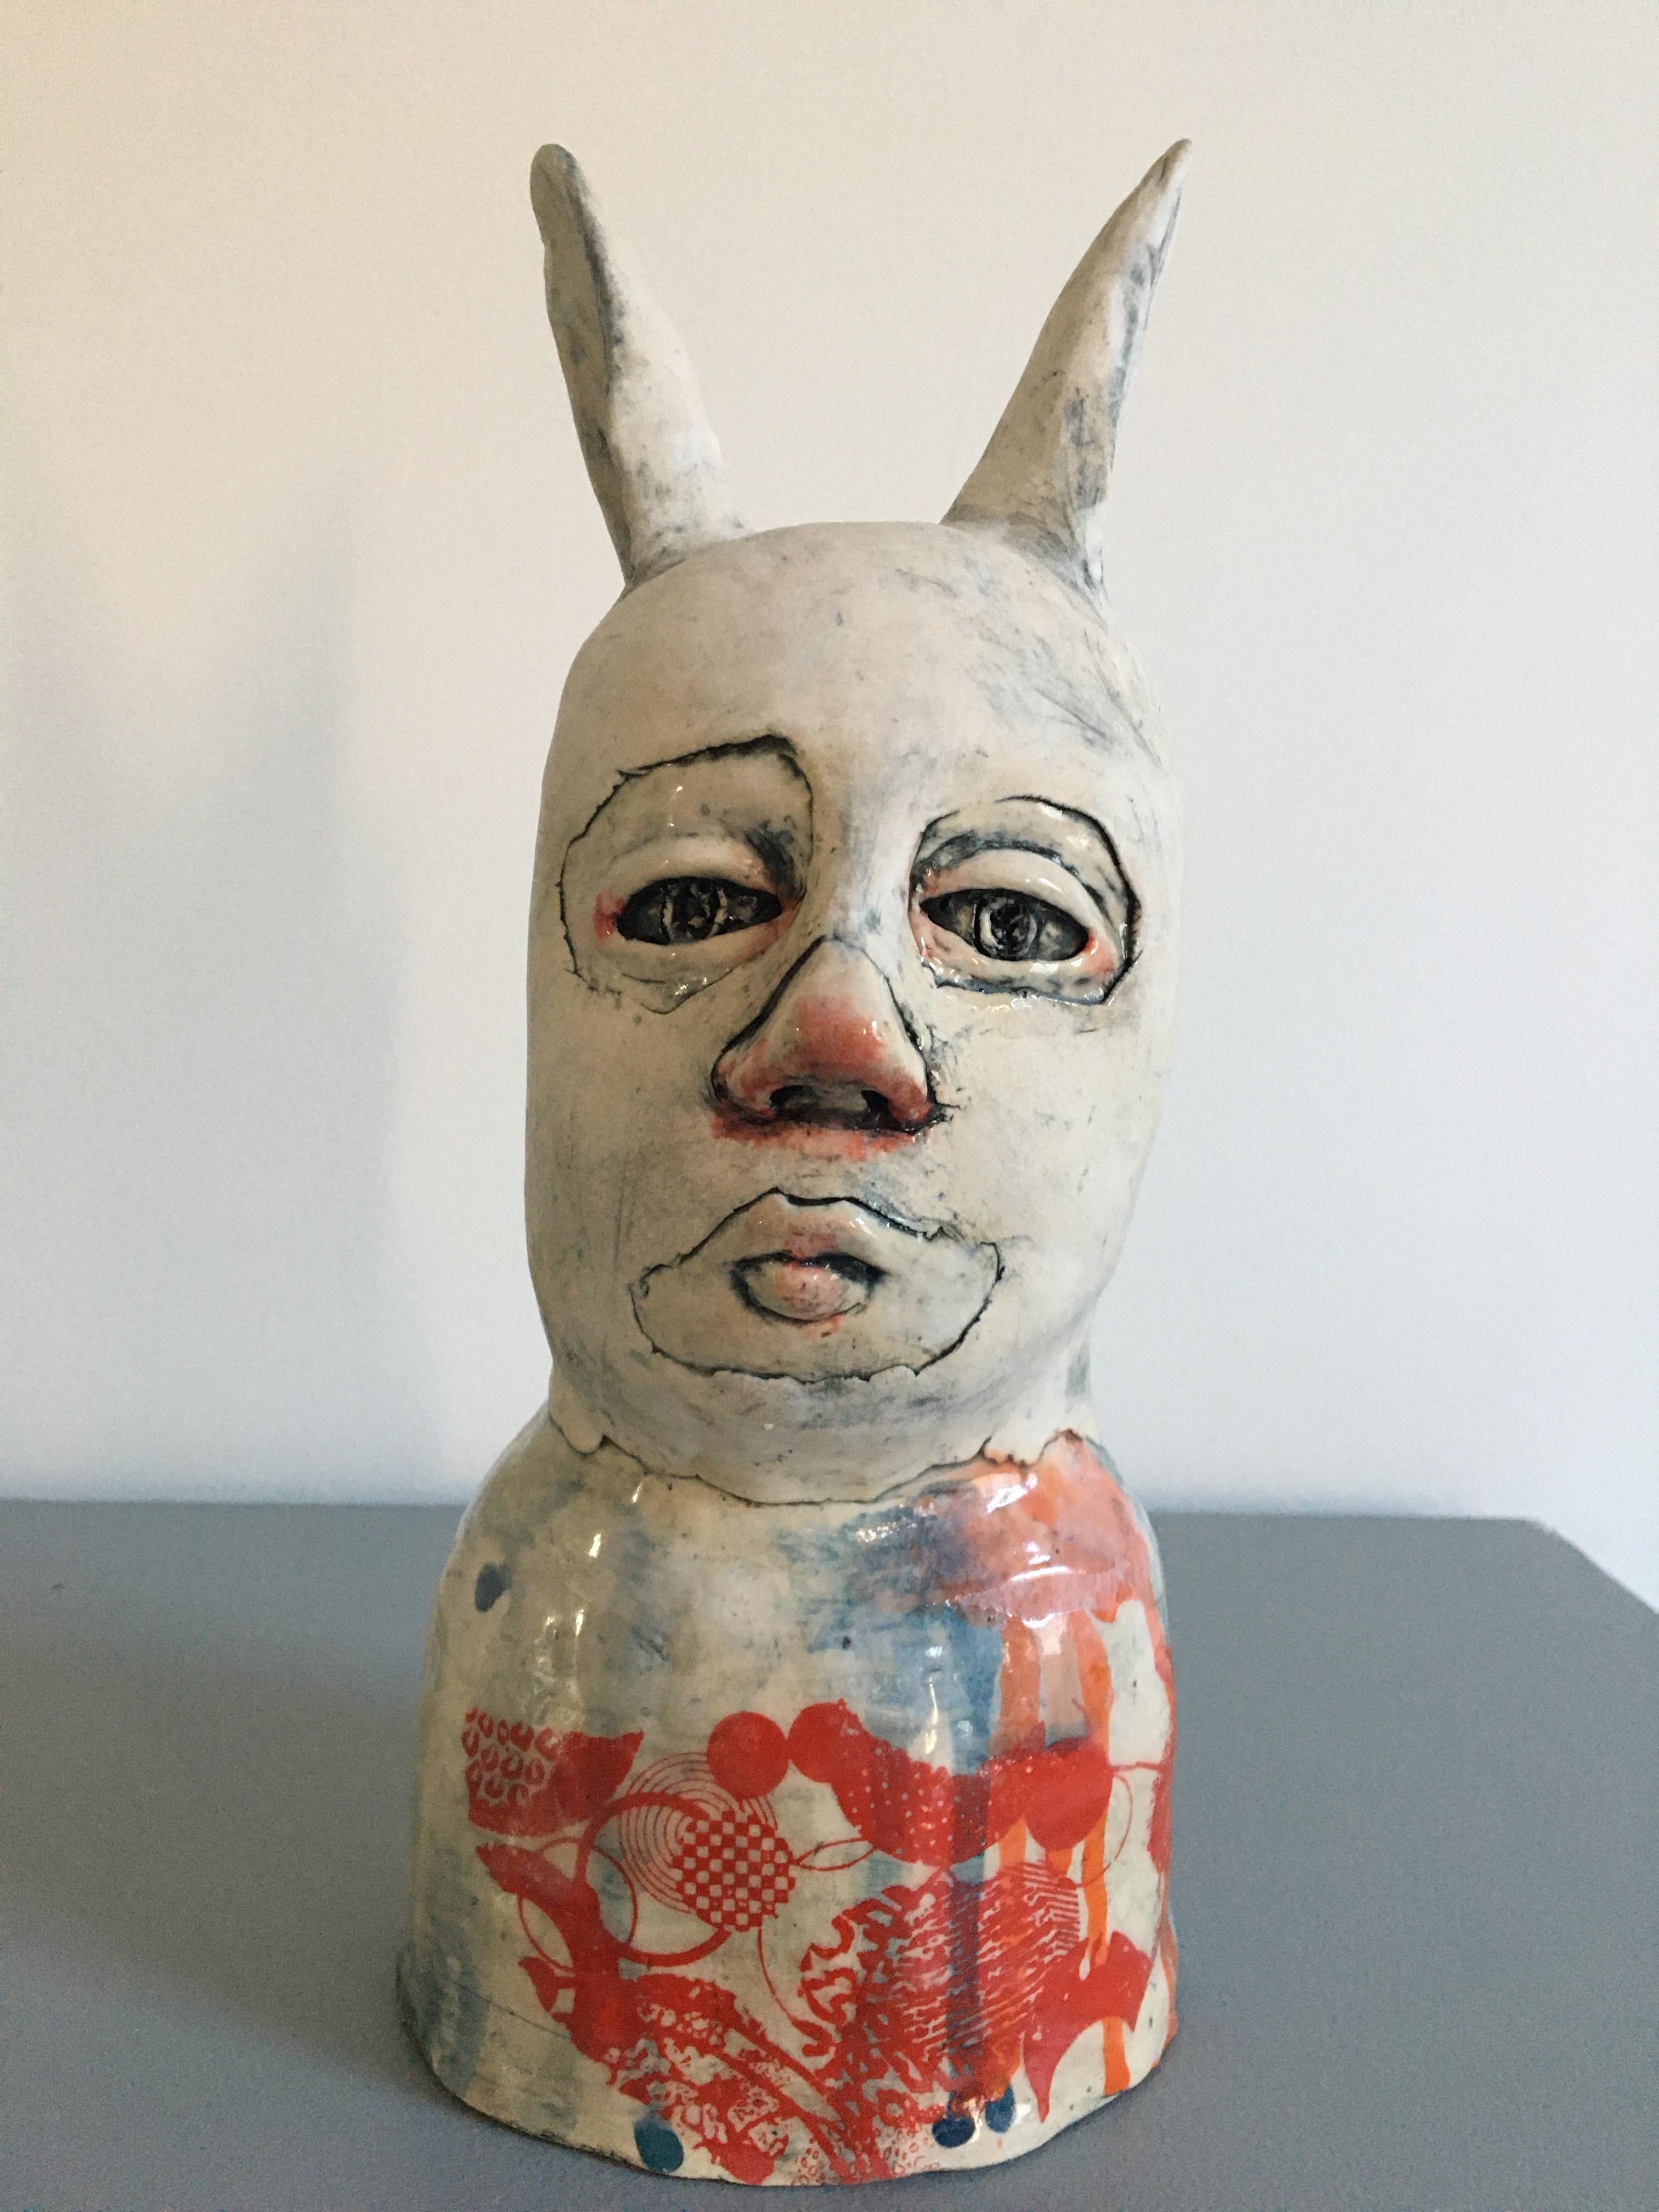 Ceramic Bunny Person: 'He’s love and light and all things bright and dark'